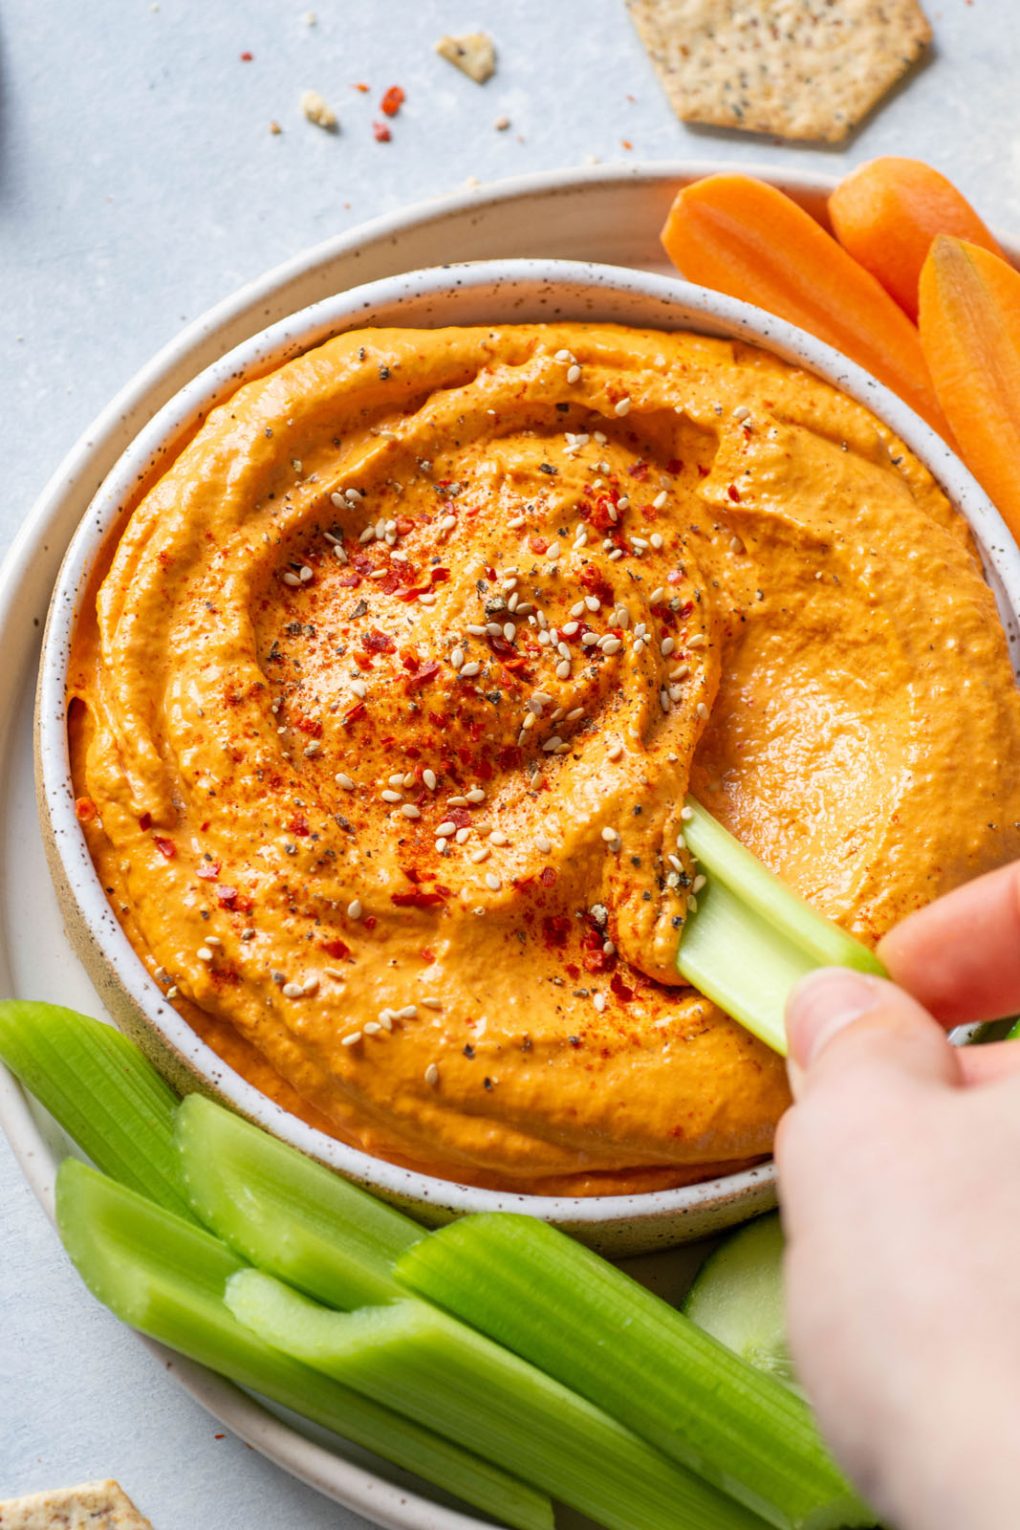 Side angle shot of a small speckled white bowl filled with bright orange roasted red pepper tahini dip. Dip is garnished with sesame seeds and chili flakes, and a hand on the bottom right of the frame is dipping a celery stick into the dip. On a plate with carrots, sliced cucumber, and celery sticks.